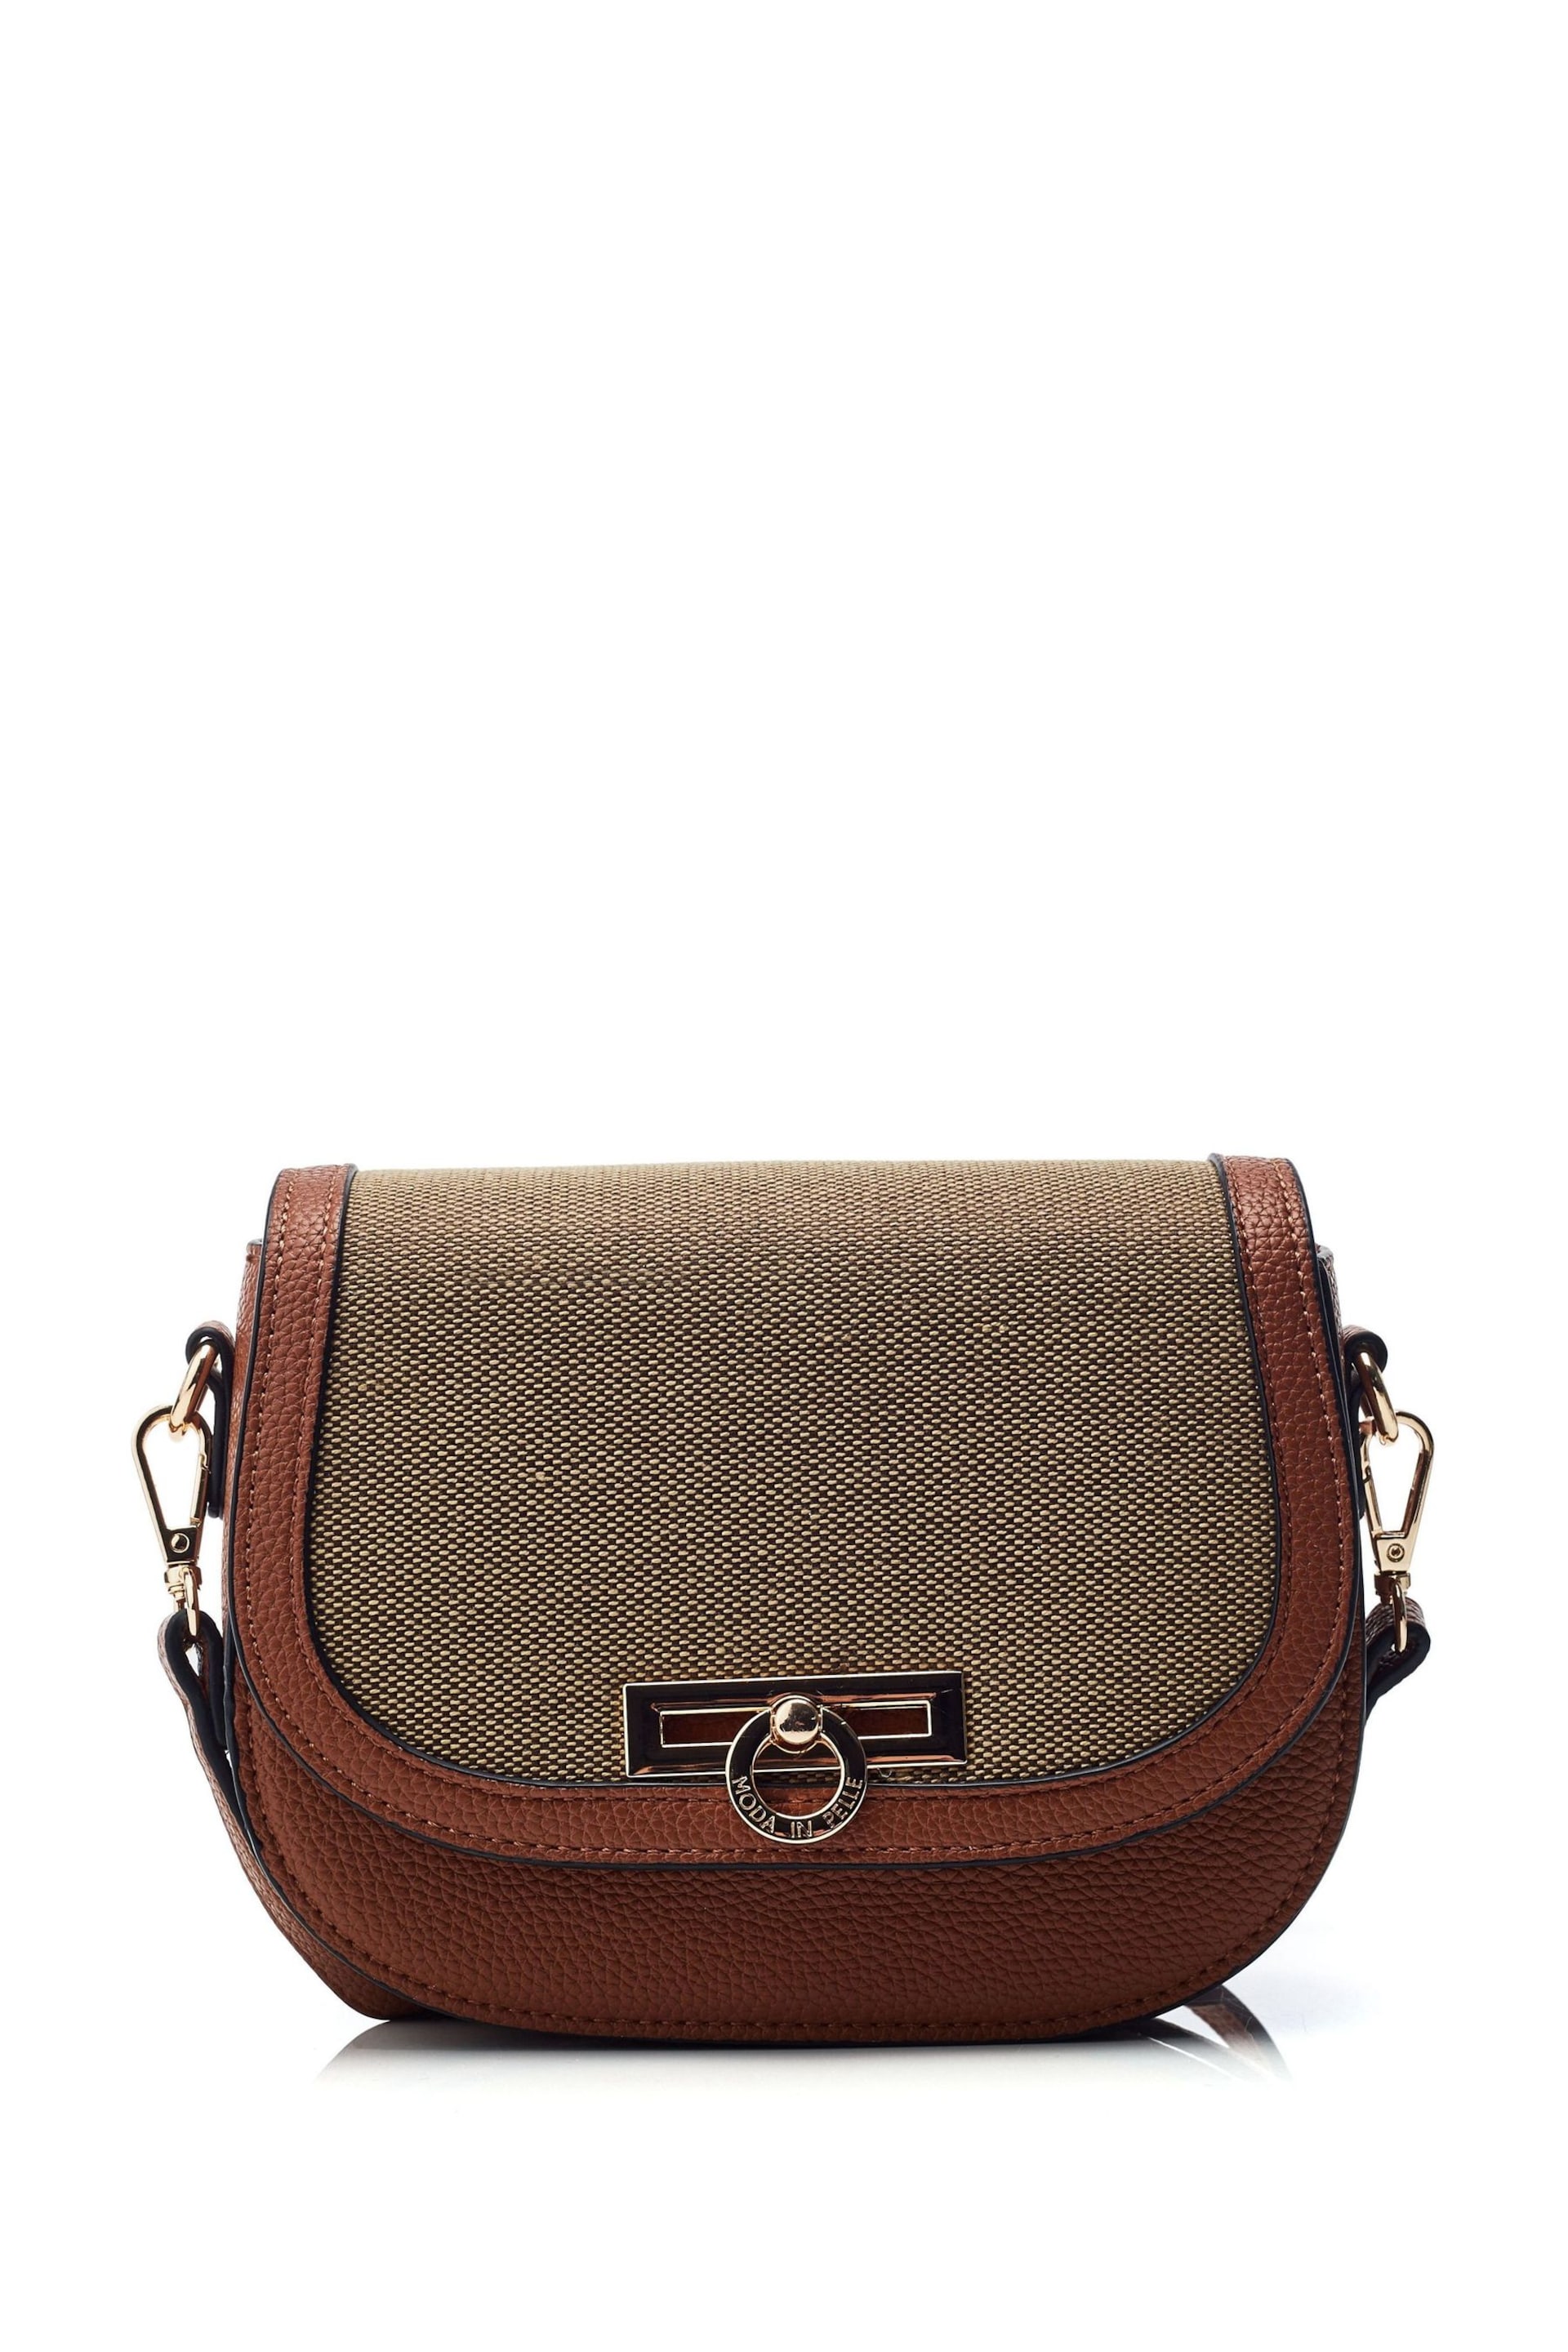 Moda in Pelle Summer Cross-Body Bag With Feature Strap - Image 1 of 4